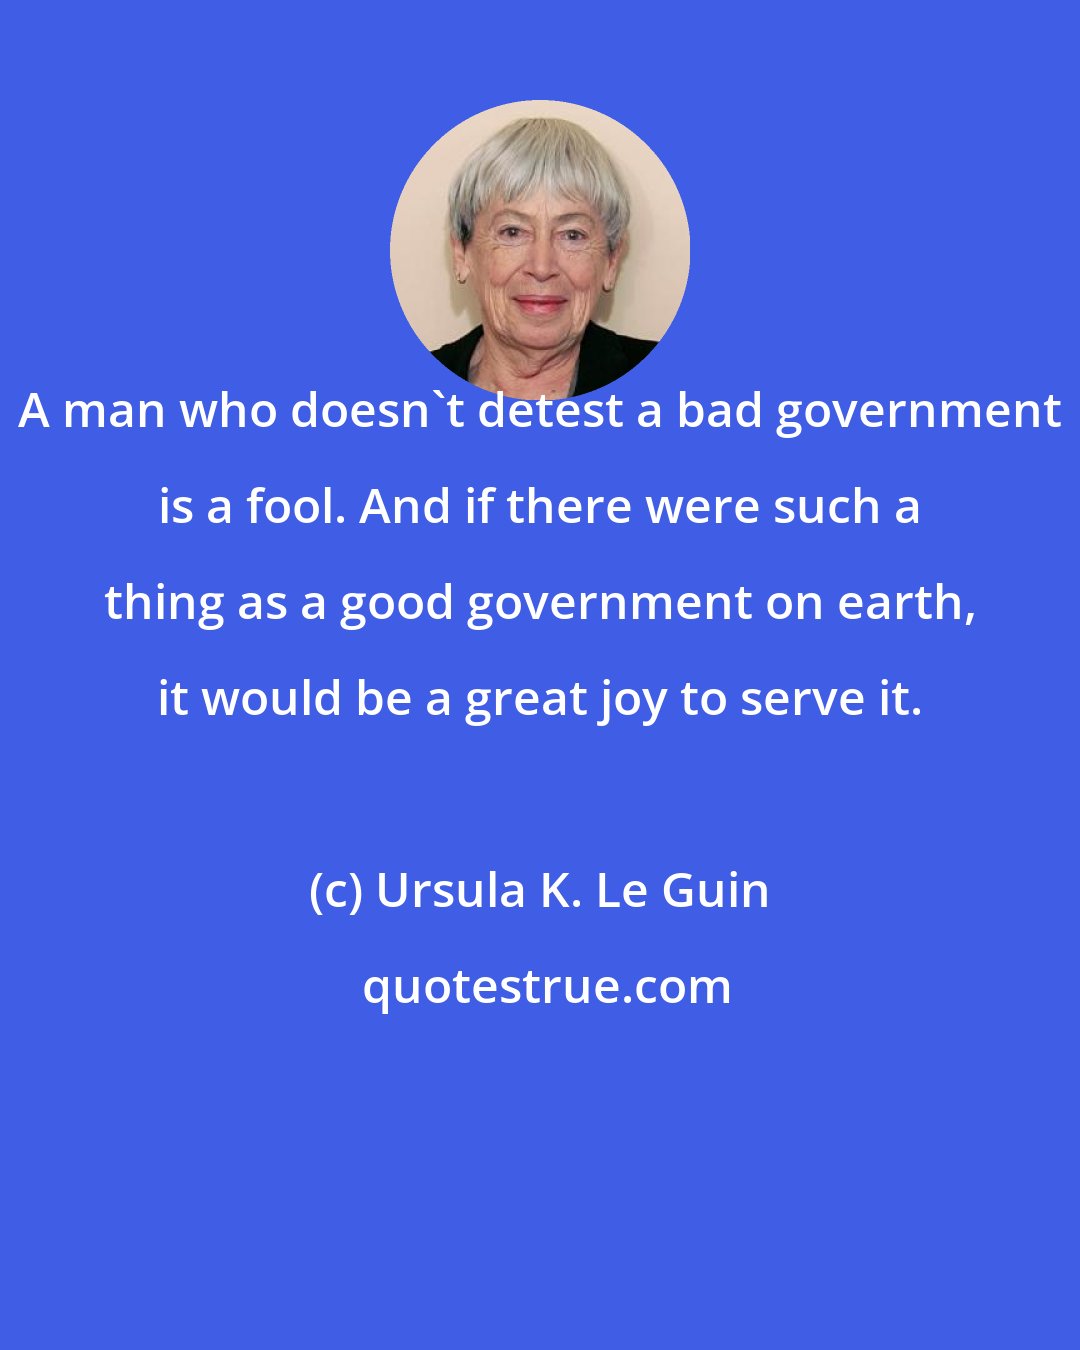 Ursula K. Le Guin: A man who doesn't detest a bad government is a fool. And if there were such a thing as a good government on earth, it would be a great joy to serve it.